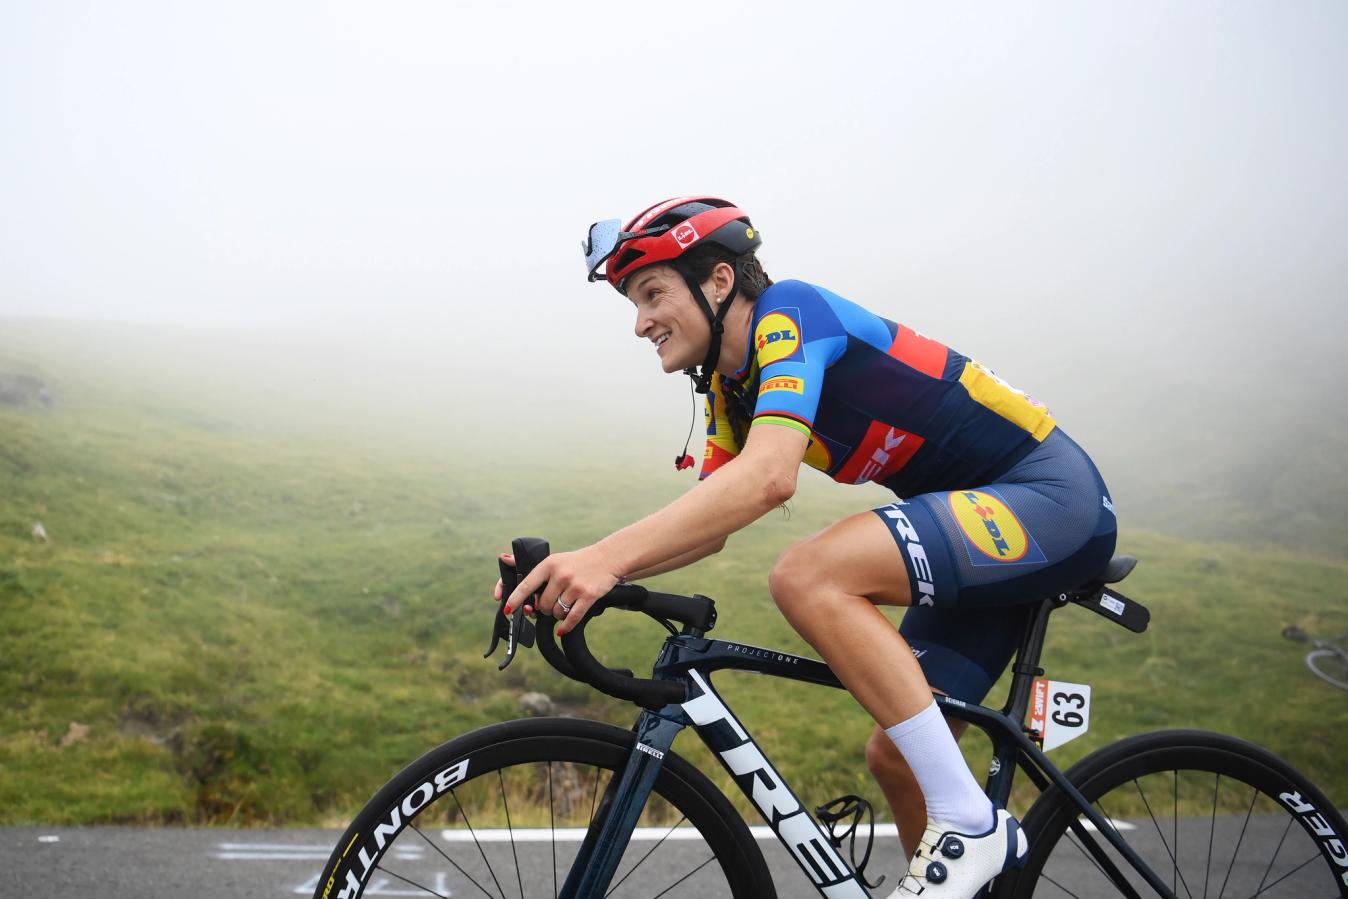 Lizzie Deignan will be entering the final year of her Lidl-Trek contract in 2023, but aims to ride for many more years to come